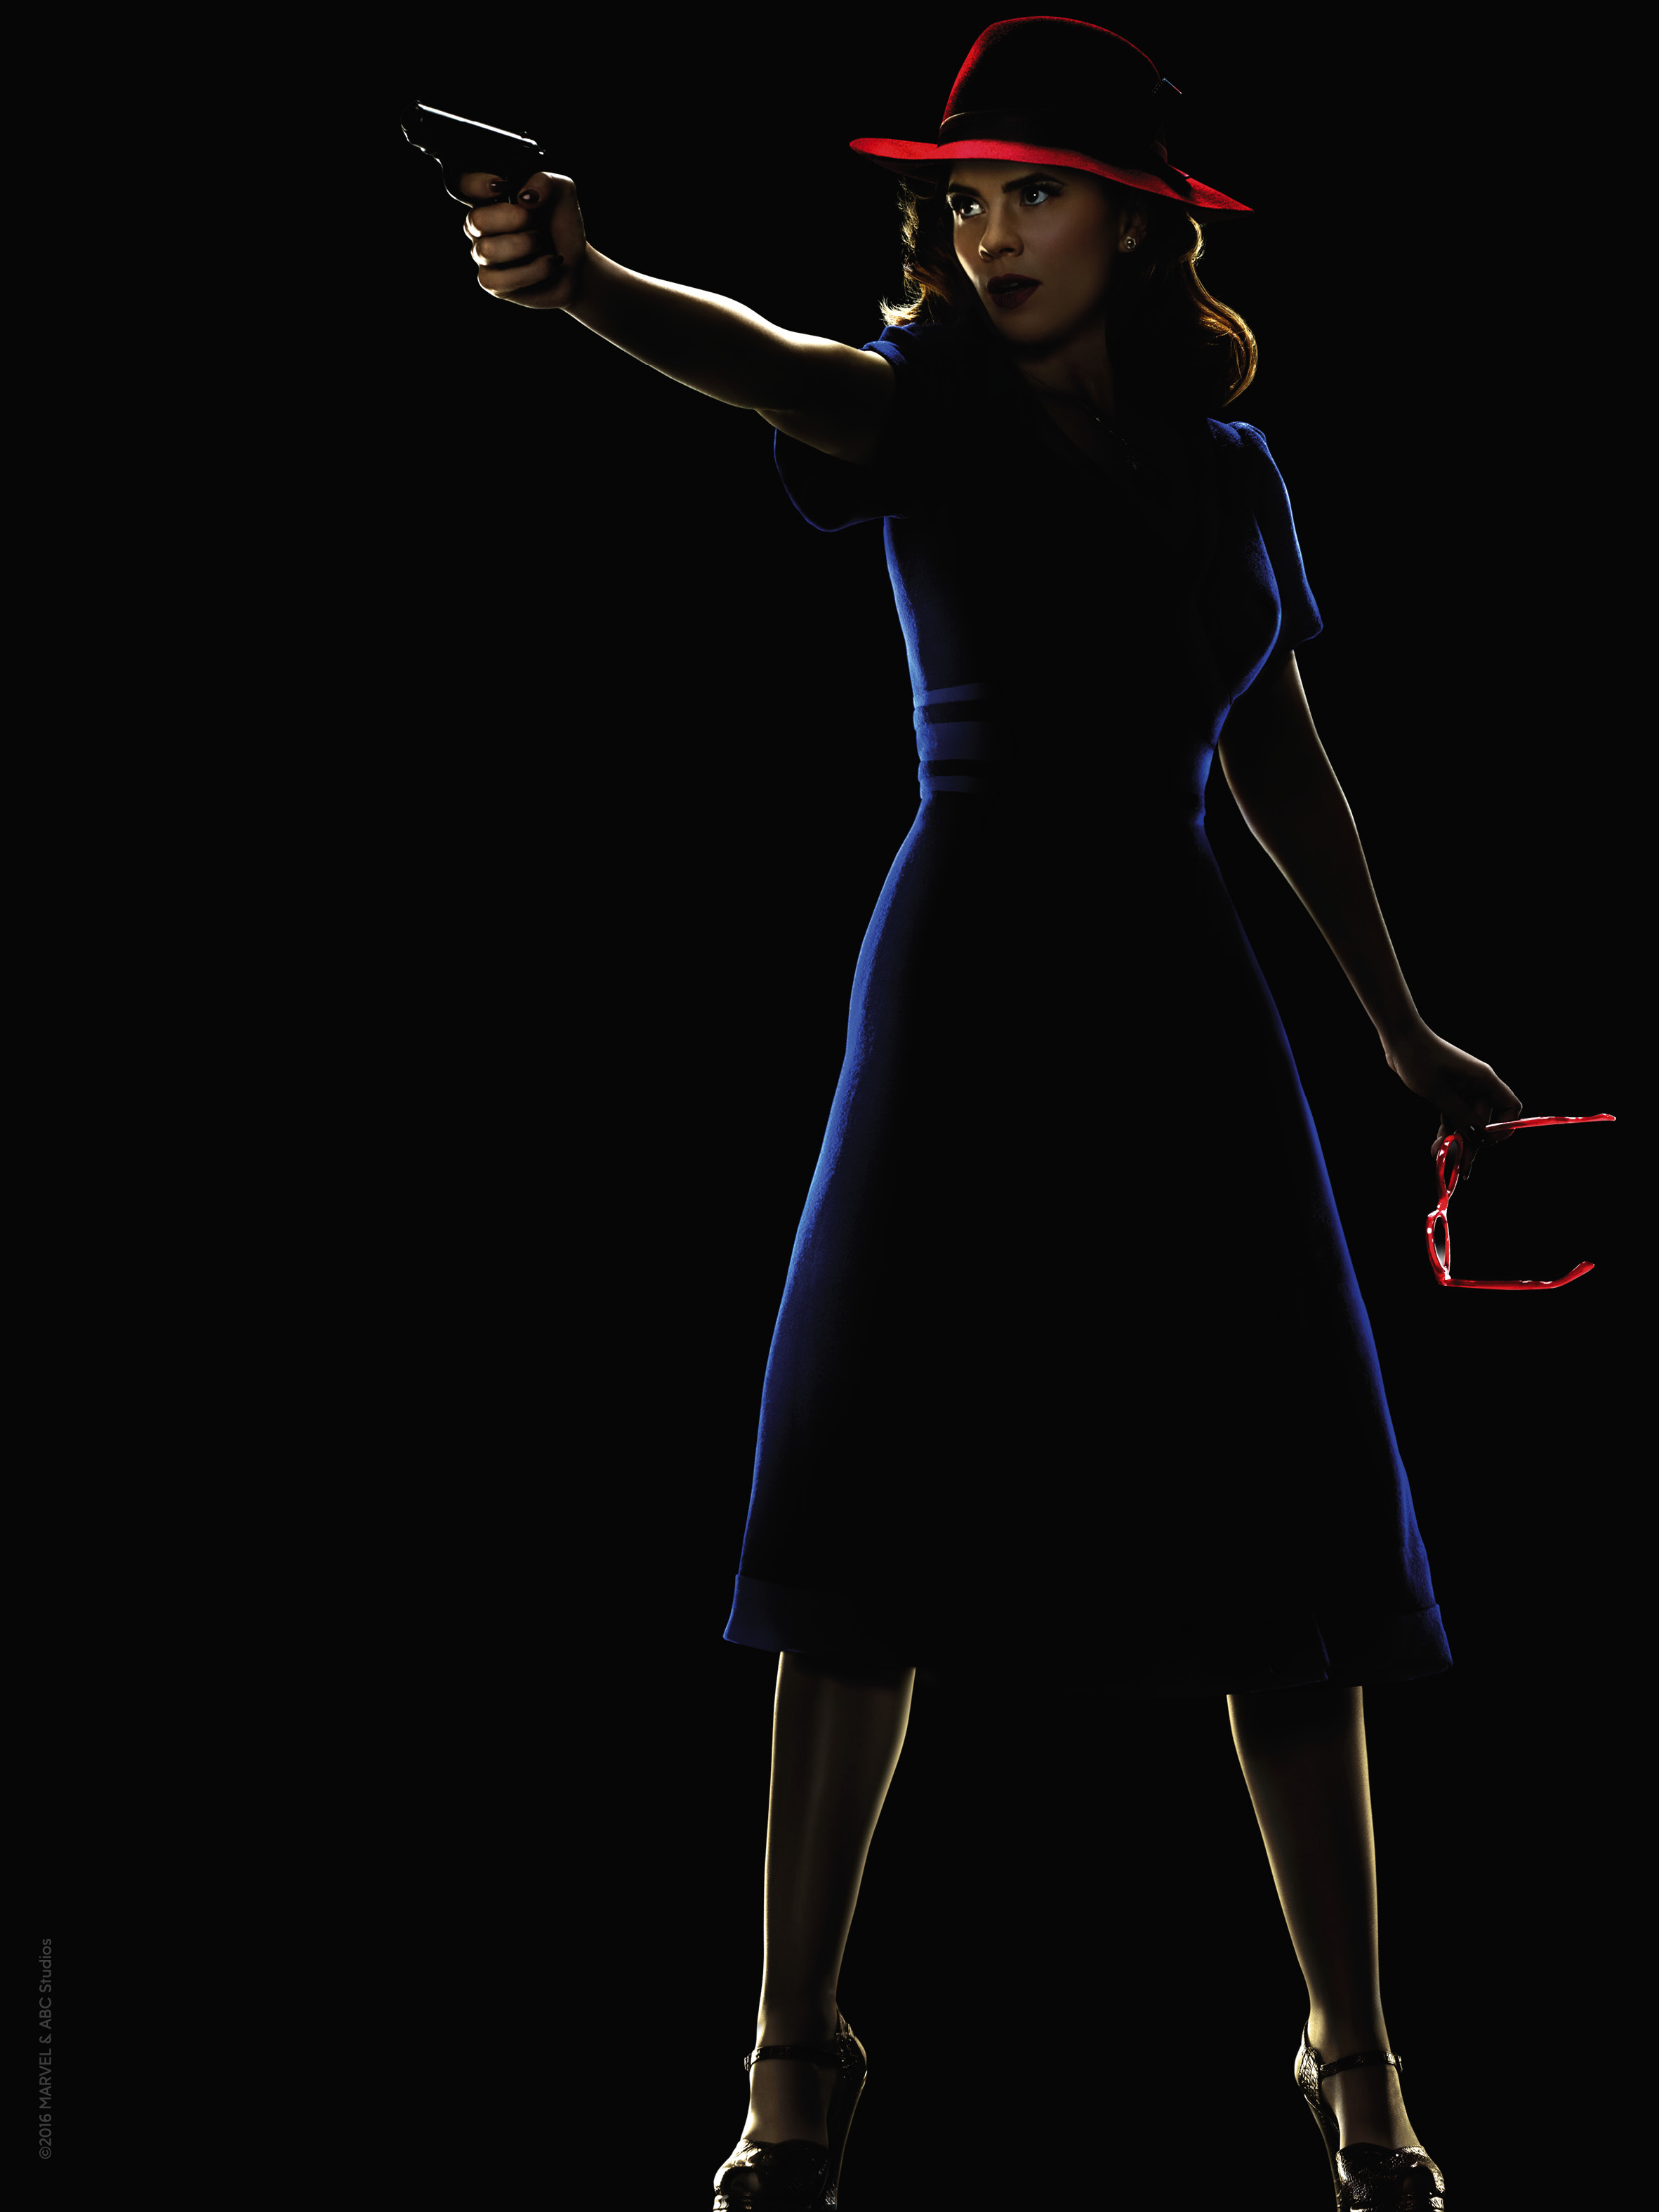 Agent Carter poster b 11 x 17 inches 